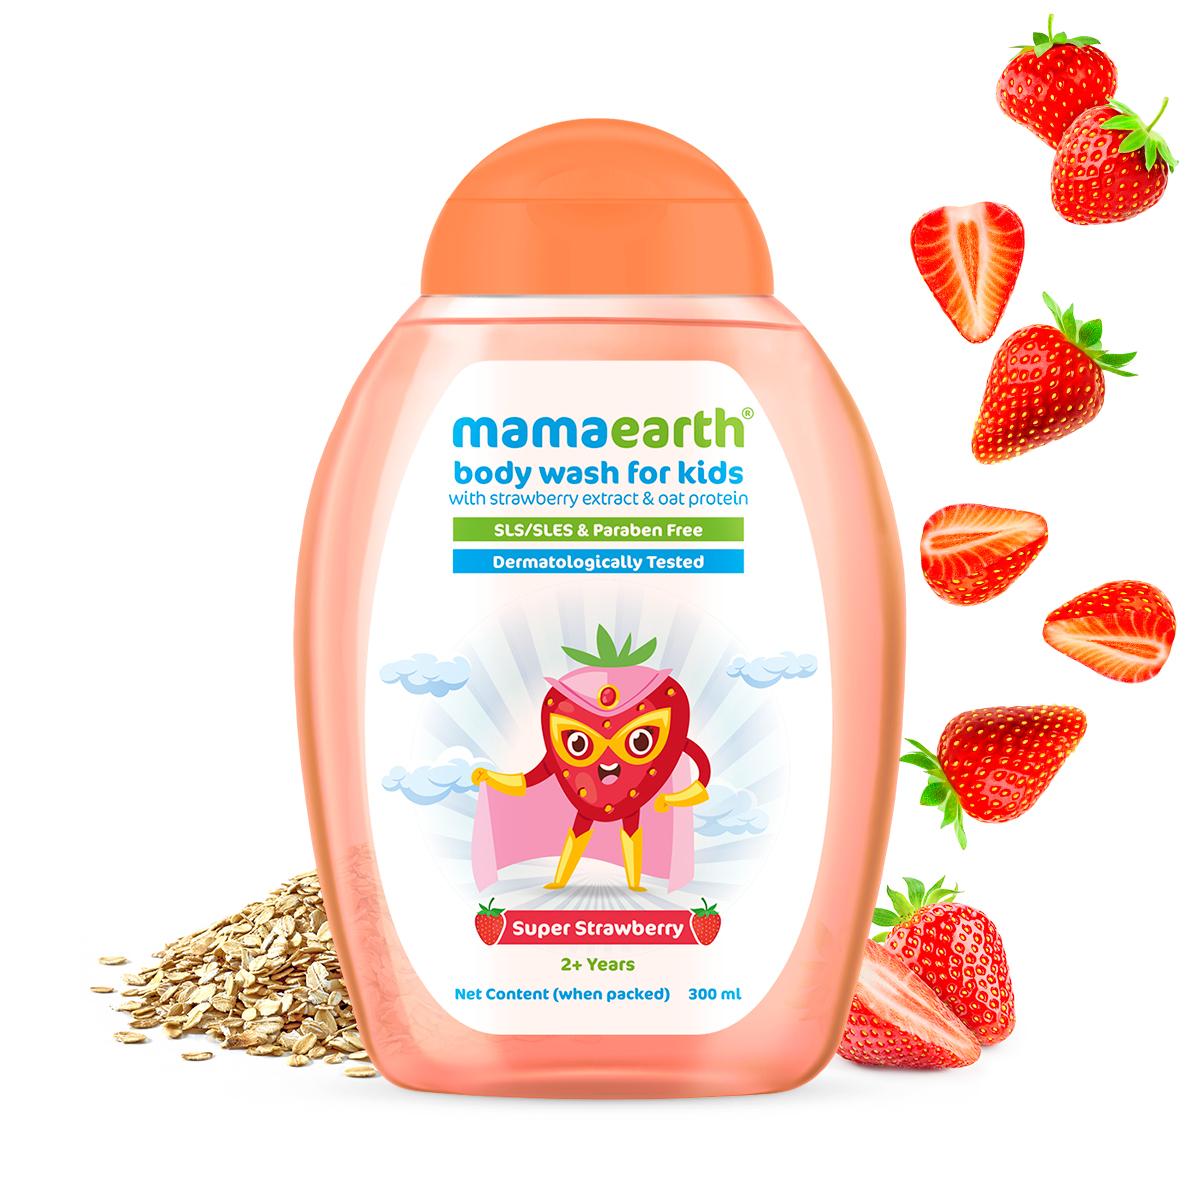 super strawberry body wash for kids with strawberry and oat protein - 300 ml